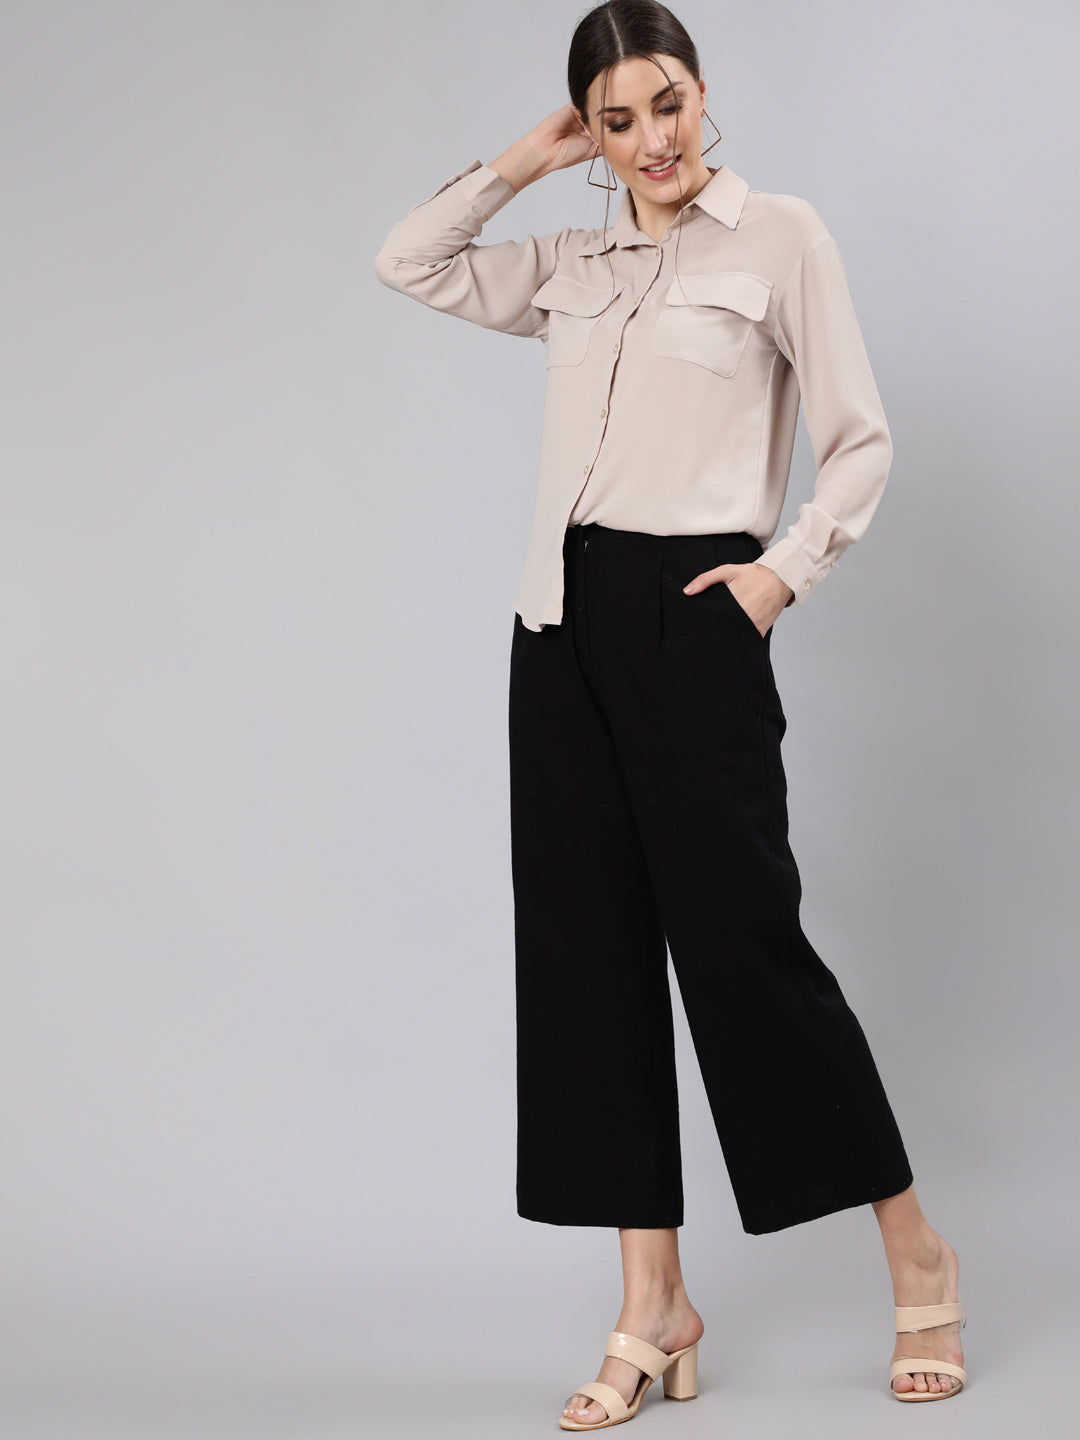 Lee Apparel Women Shirts Tops - Buy Lee Apparel Women Shirts Tops online in  India